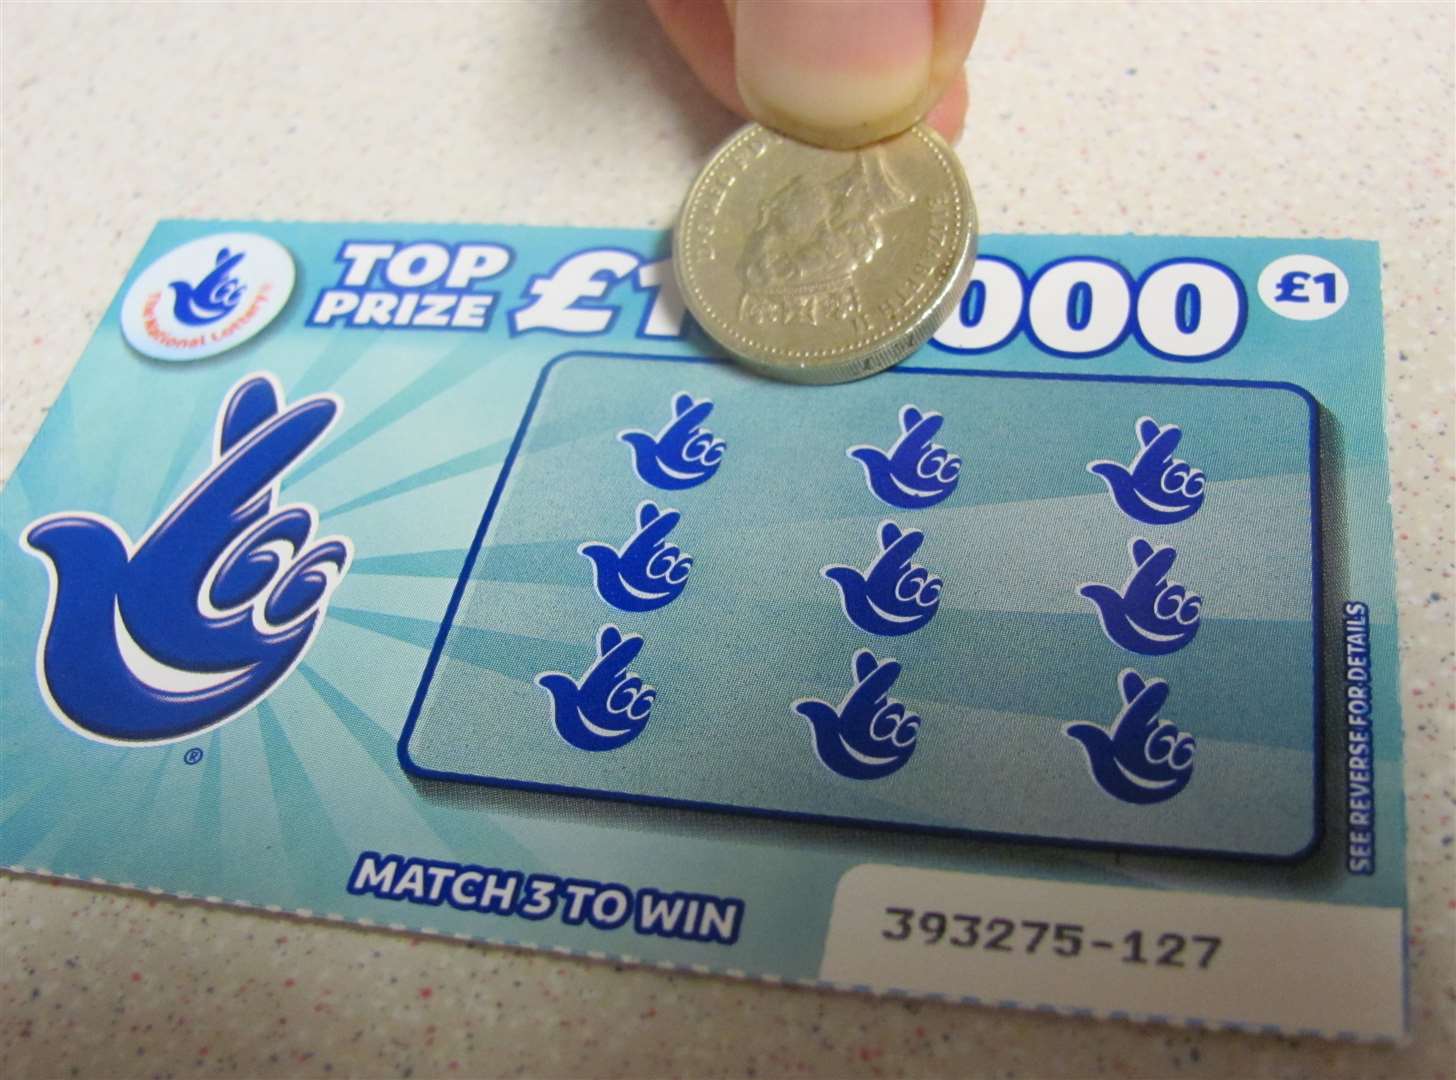 The duo had been winning and losing and scratchcards